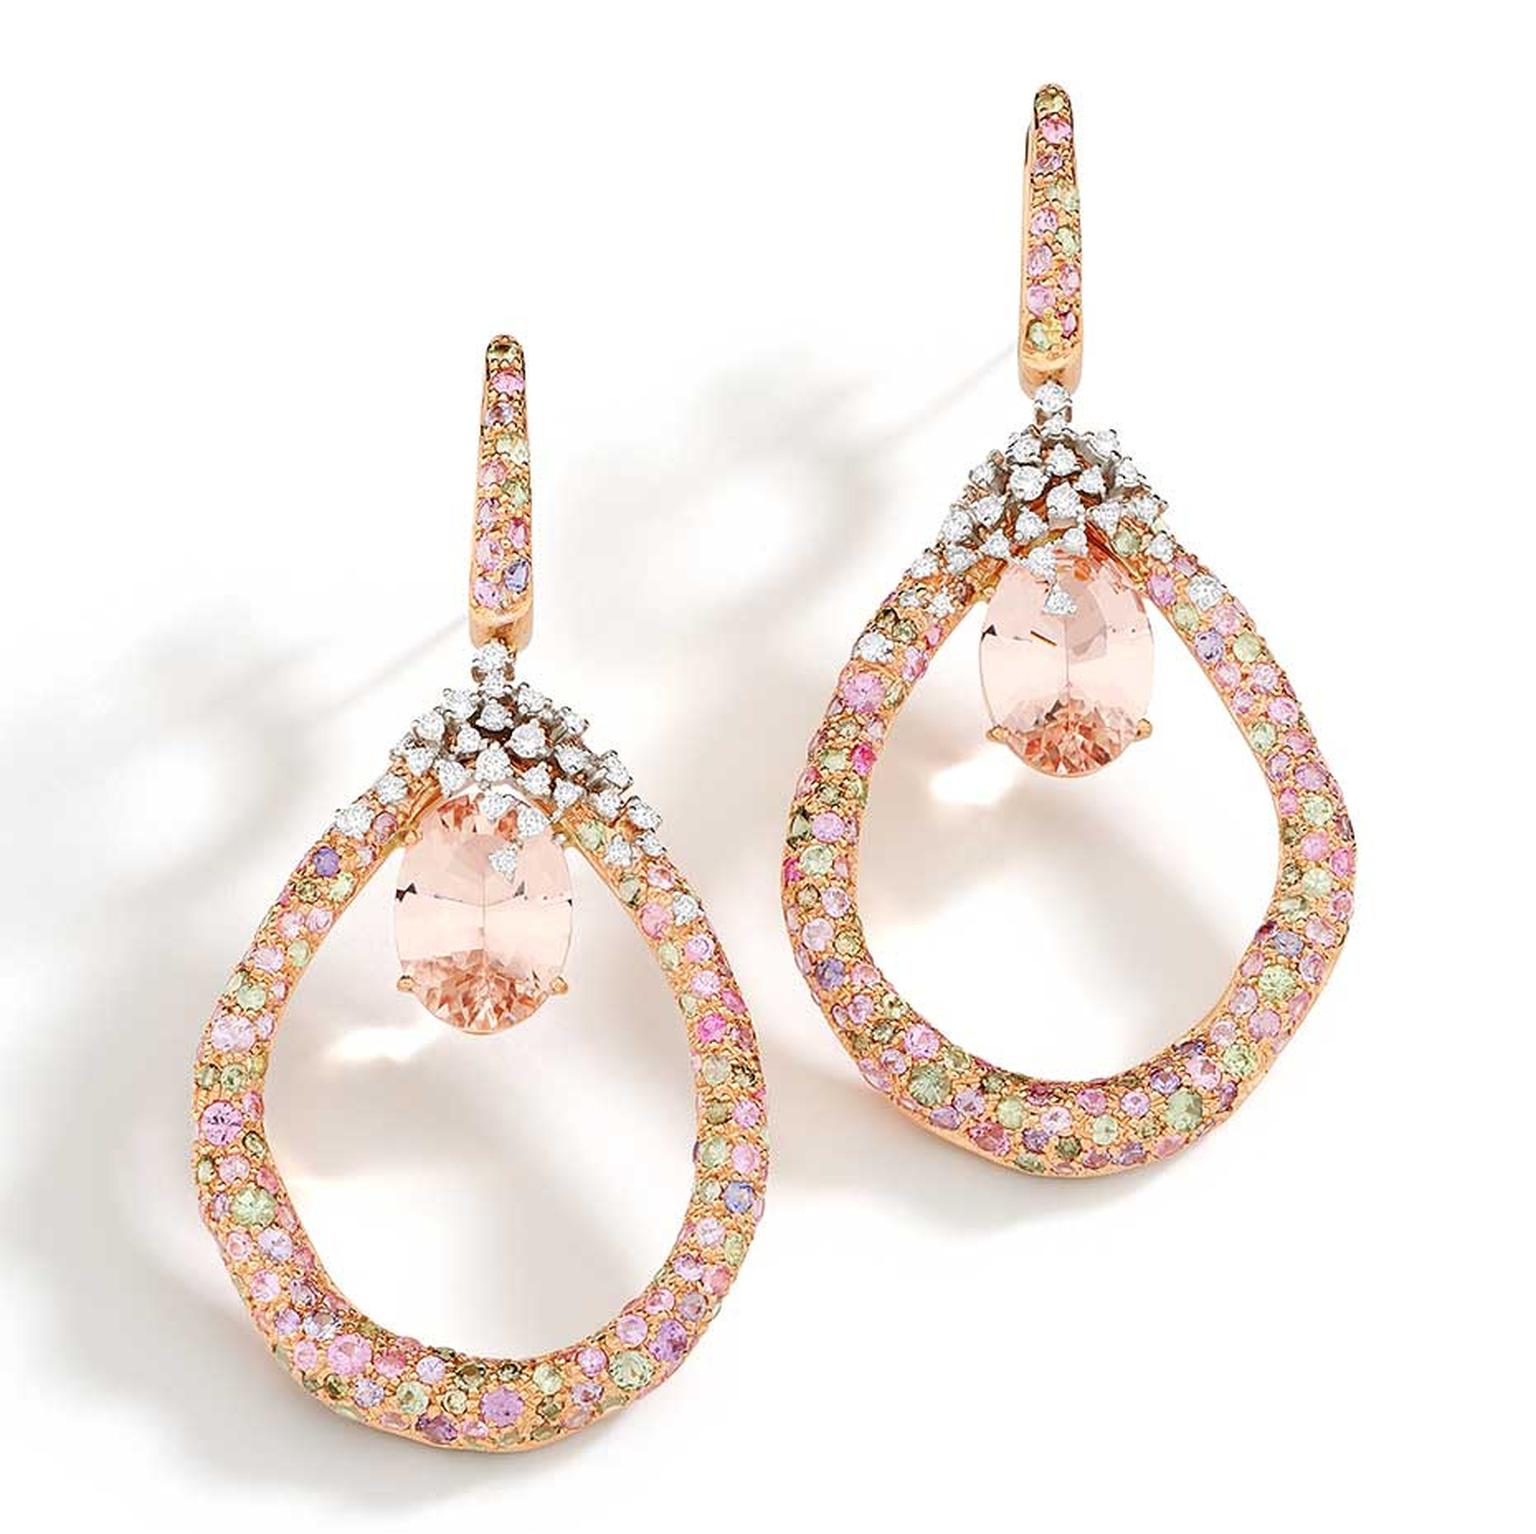 Brumani Panache collection white and rose gold earrings with white and brown diamonds, morganite and multi-coloured sapphires